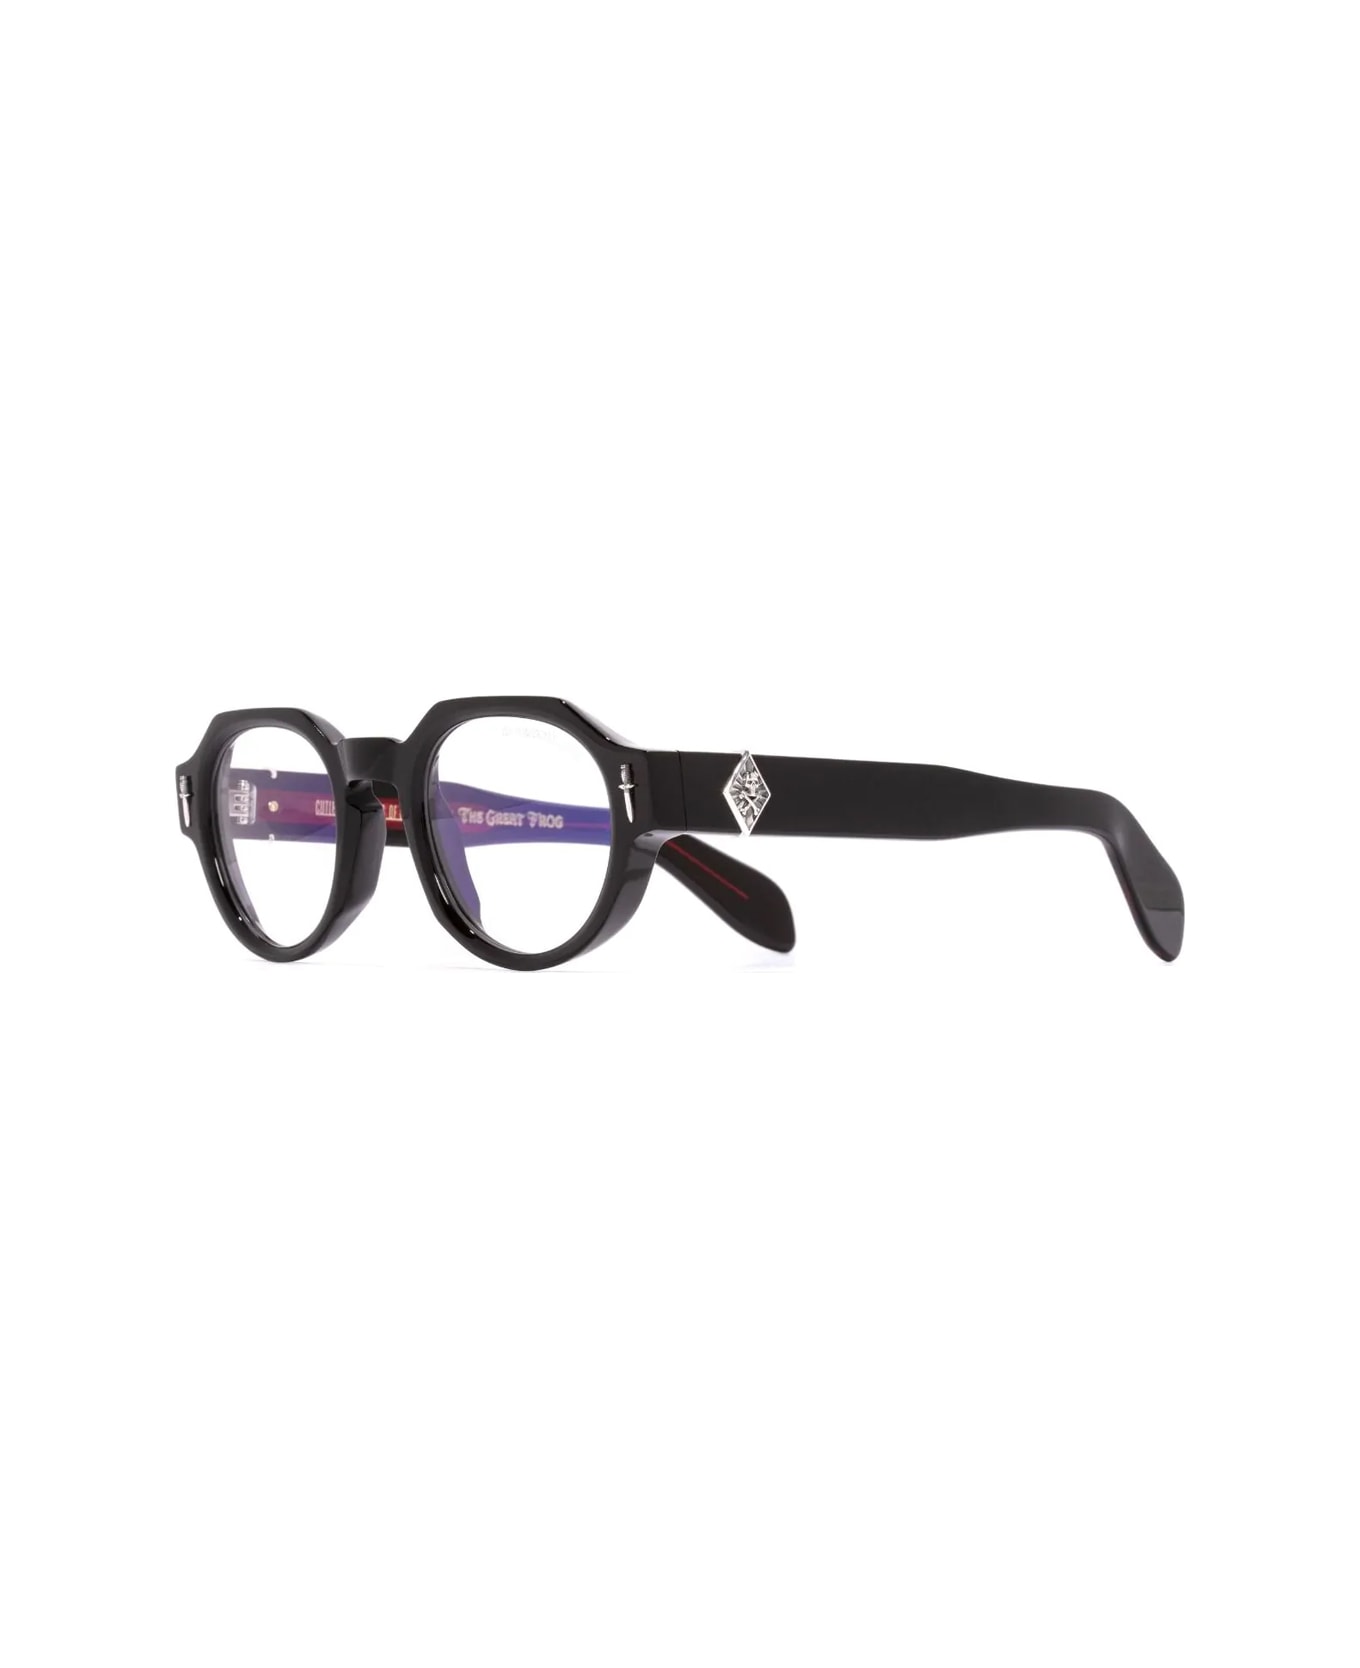 Cutler and Gross Great Frog 006 01 Glasses - Nero